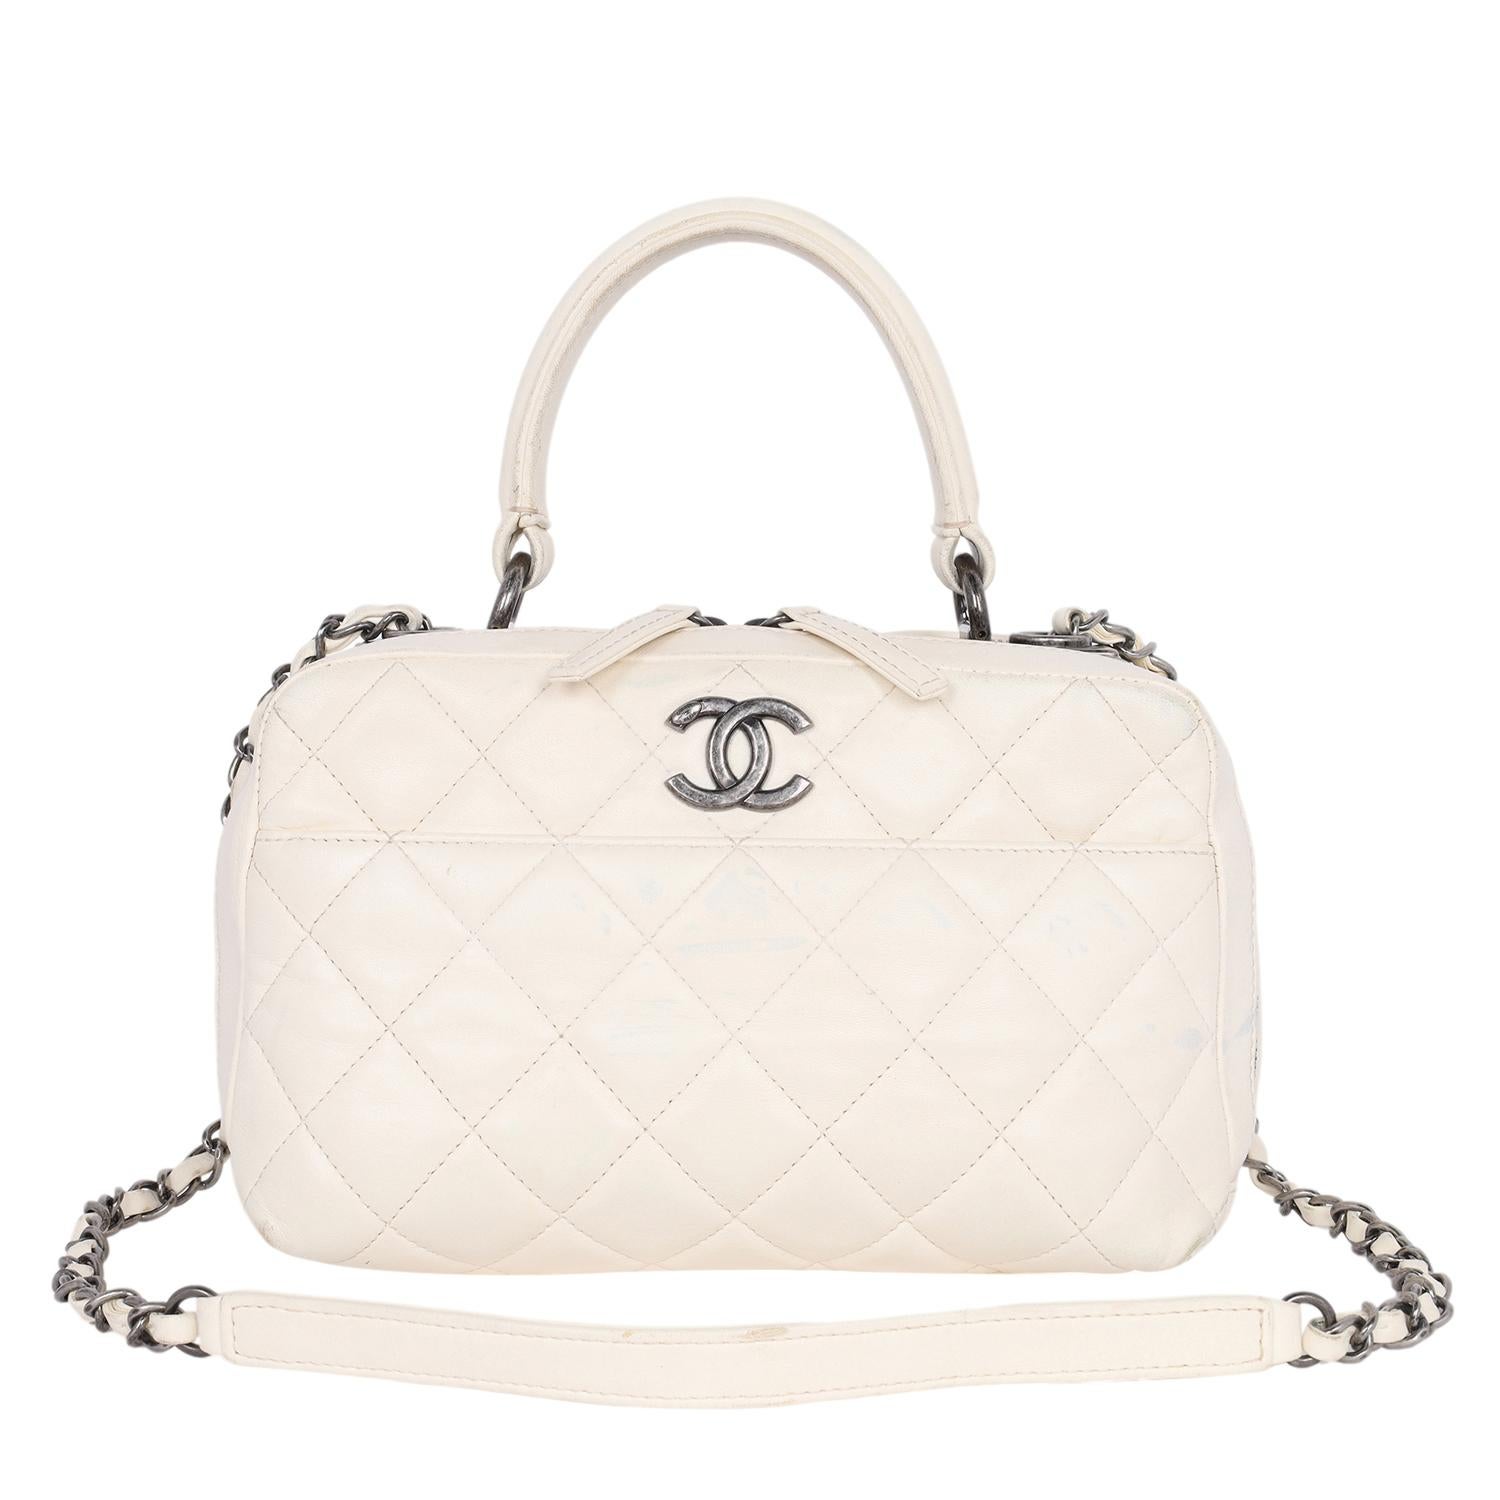 Authentic, pre-loved Chanel white quilted lambskin leather vanity case shoulder bag. Features quilted leather with antique silver hardware, a long woven silver chain strap, top handle, Chanel top plate, front slip pocket, dual zipper top closure